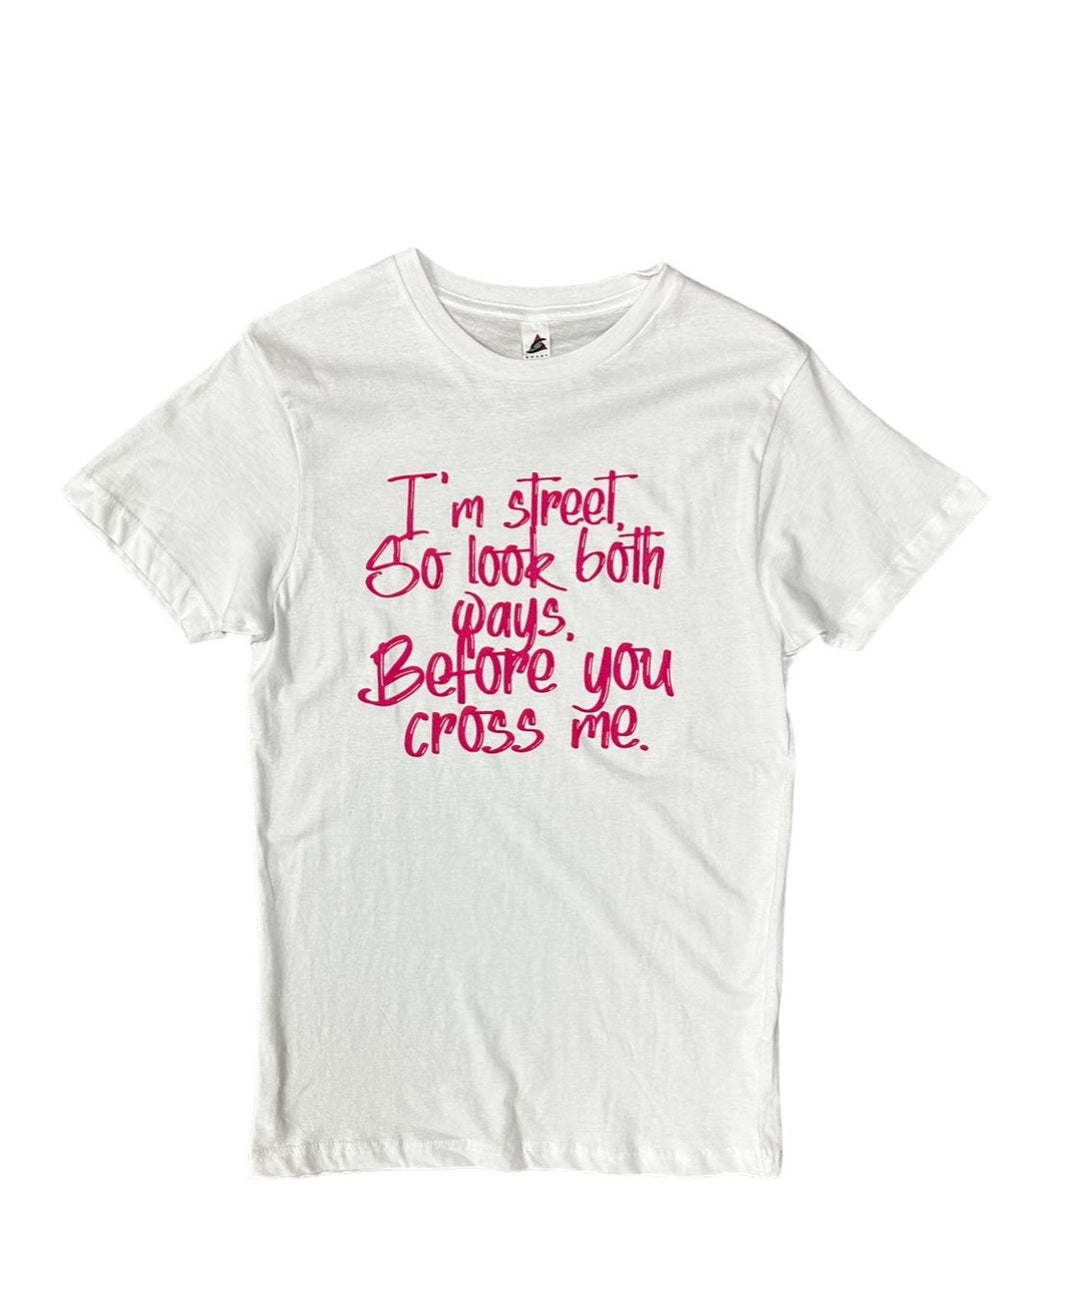 a white t - shirt with pink writing on it